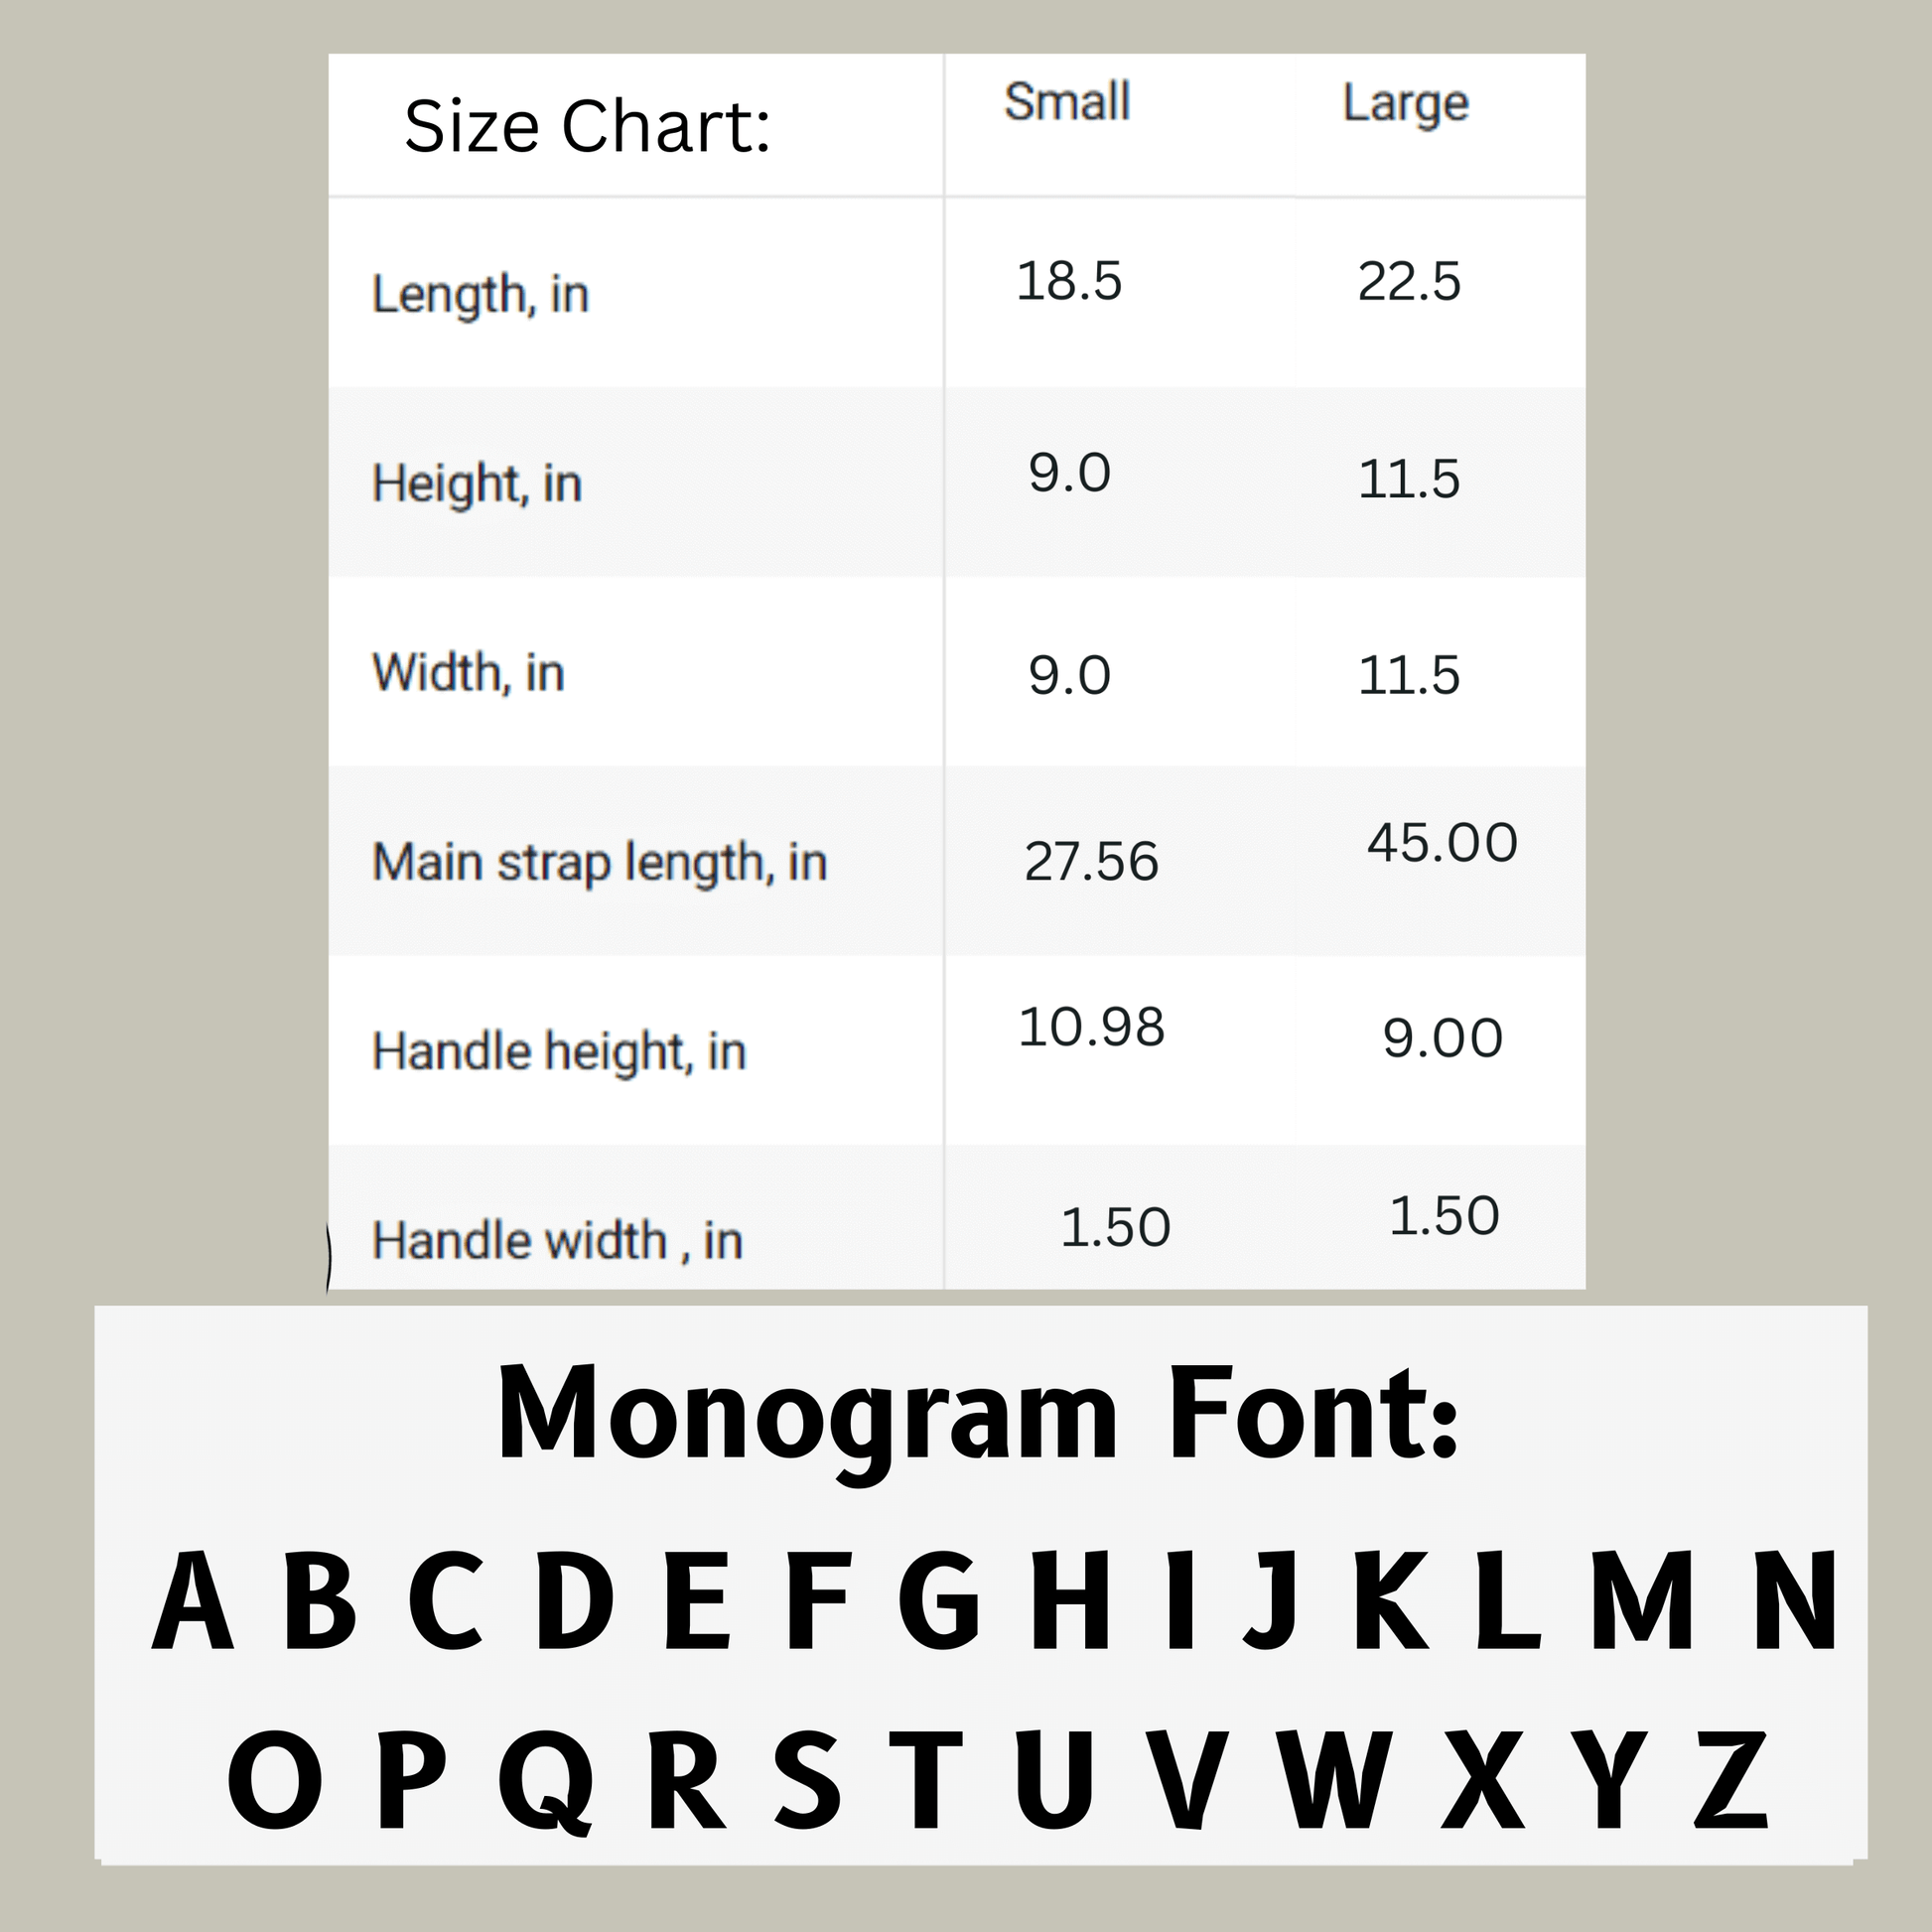 The size chart for the small and large travel bag for men in inches to compare the sizes. This also shows the monogram font used with the entire alphabet.